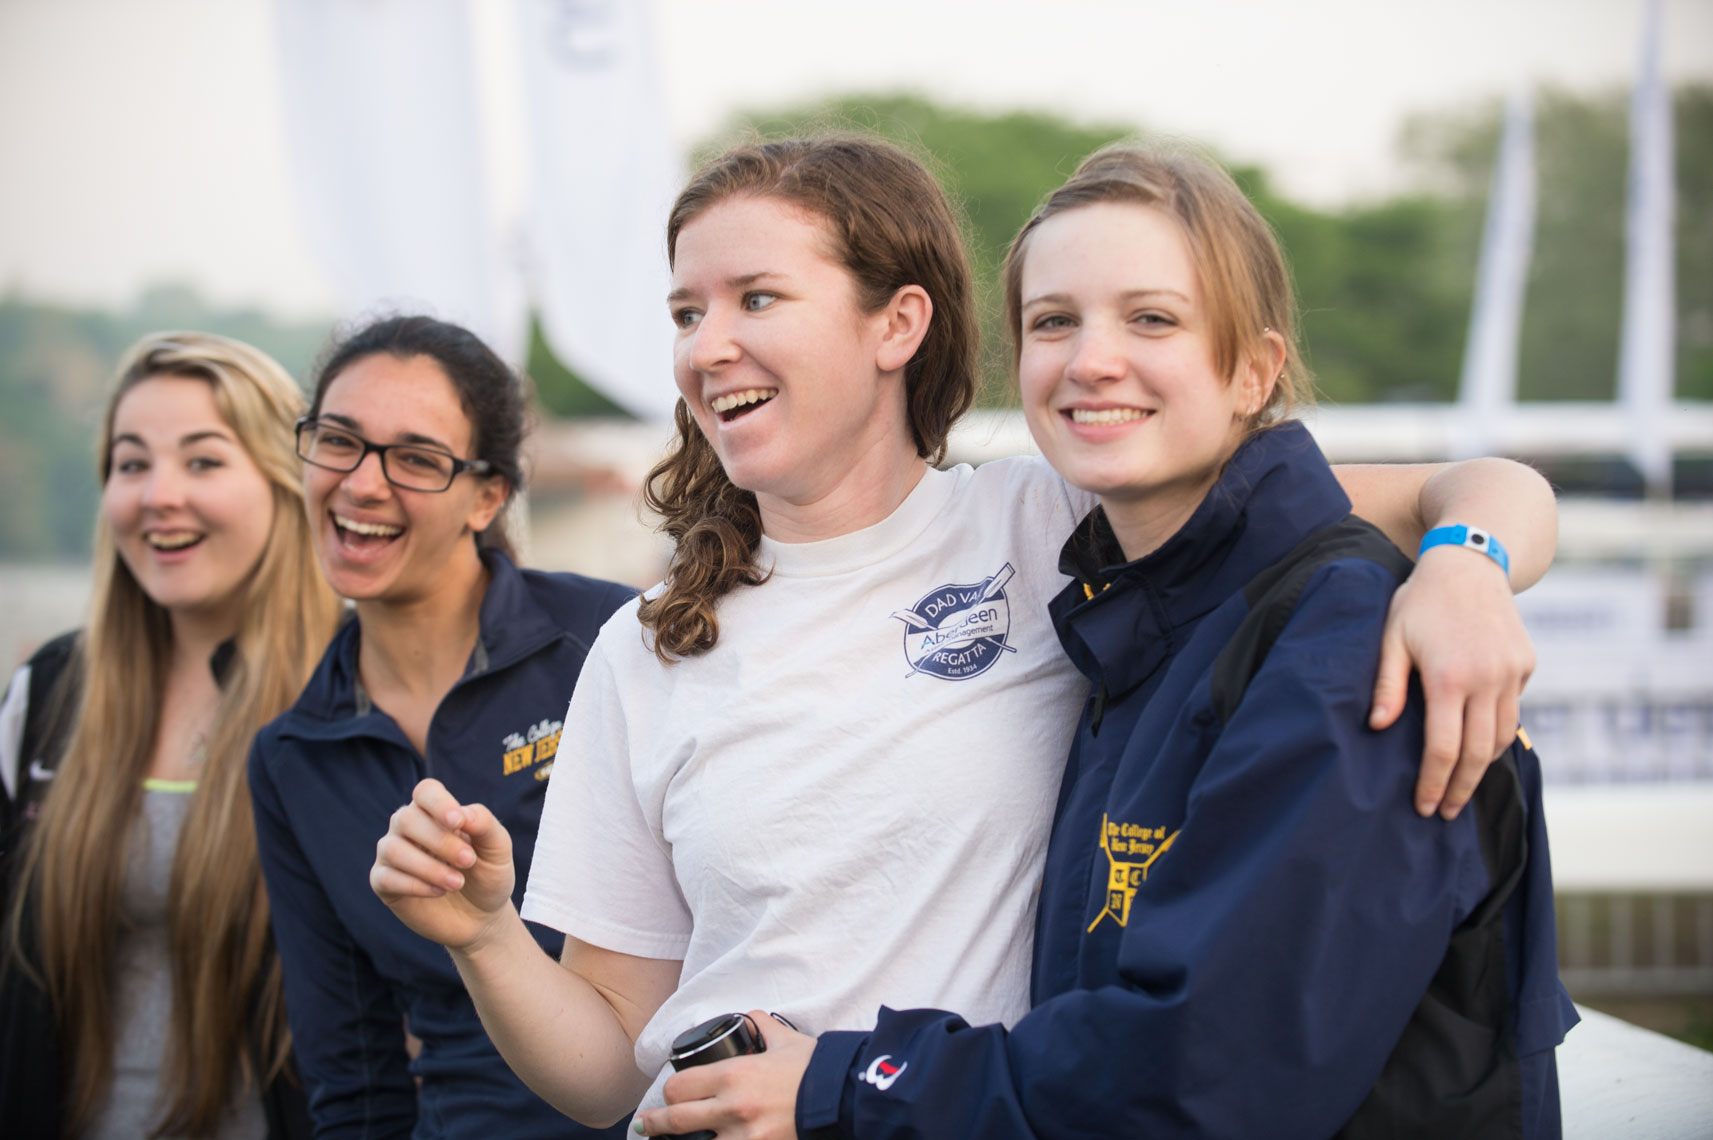 Team members of the TCNJ crew team smiling and having fun